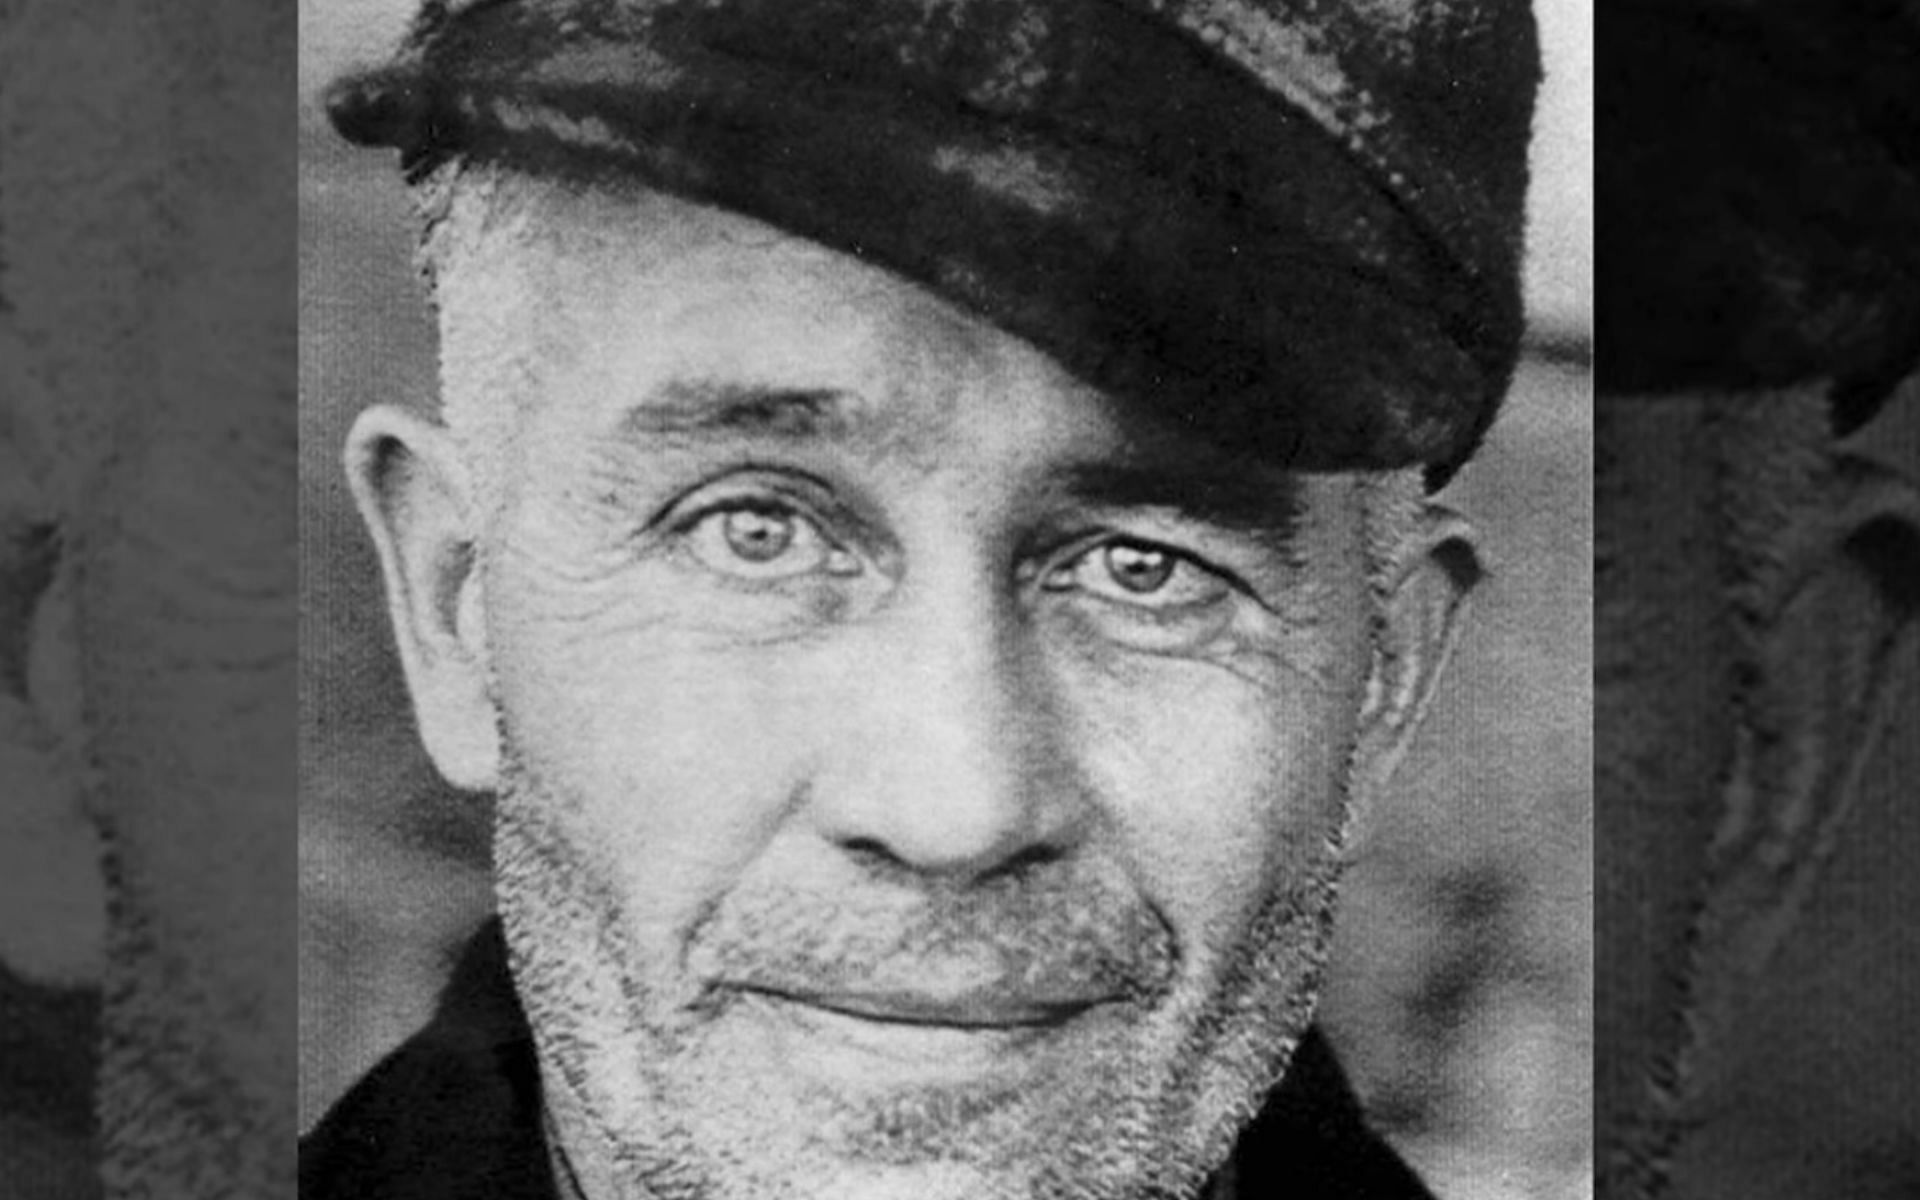 Ed Gein partly inspired the character of Leatherface (Image via Biographics/Youtube)